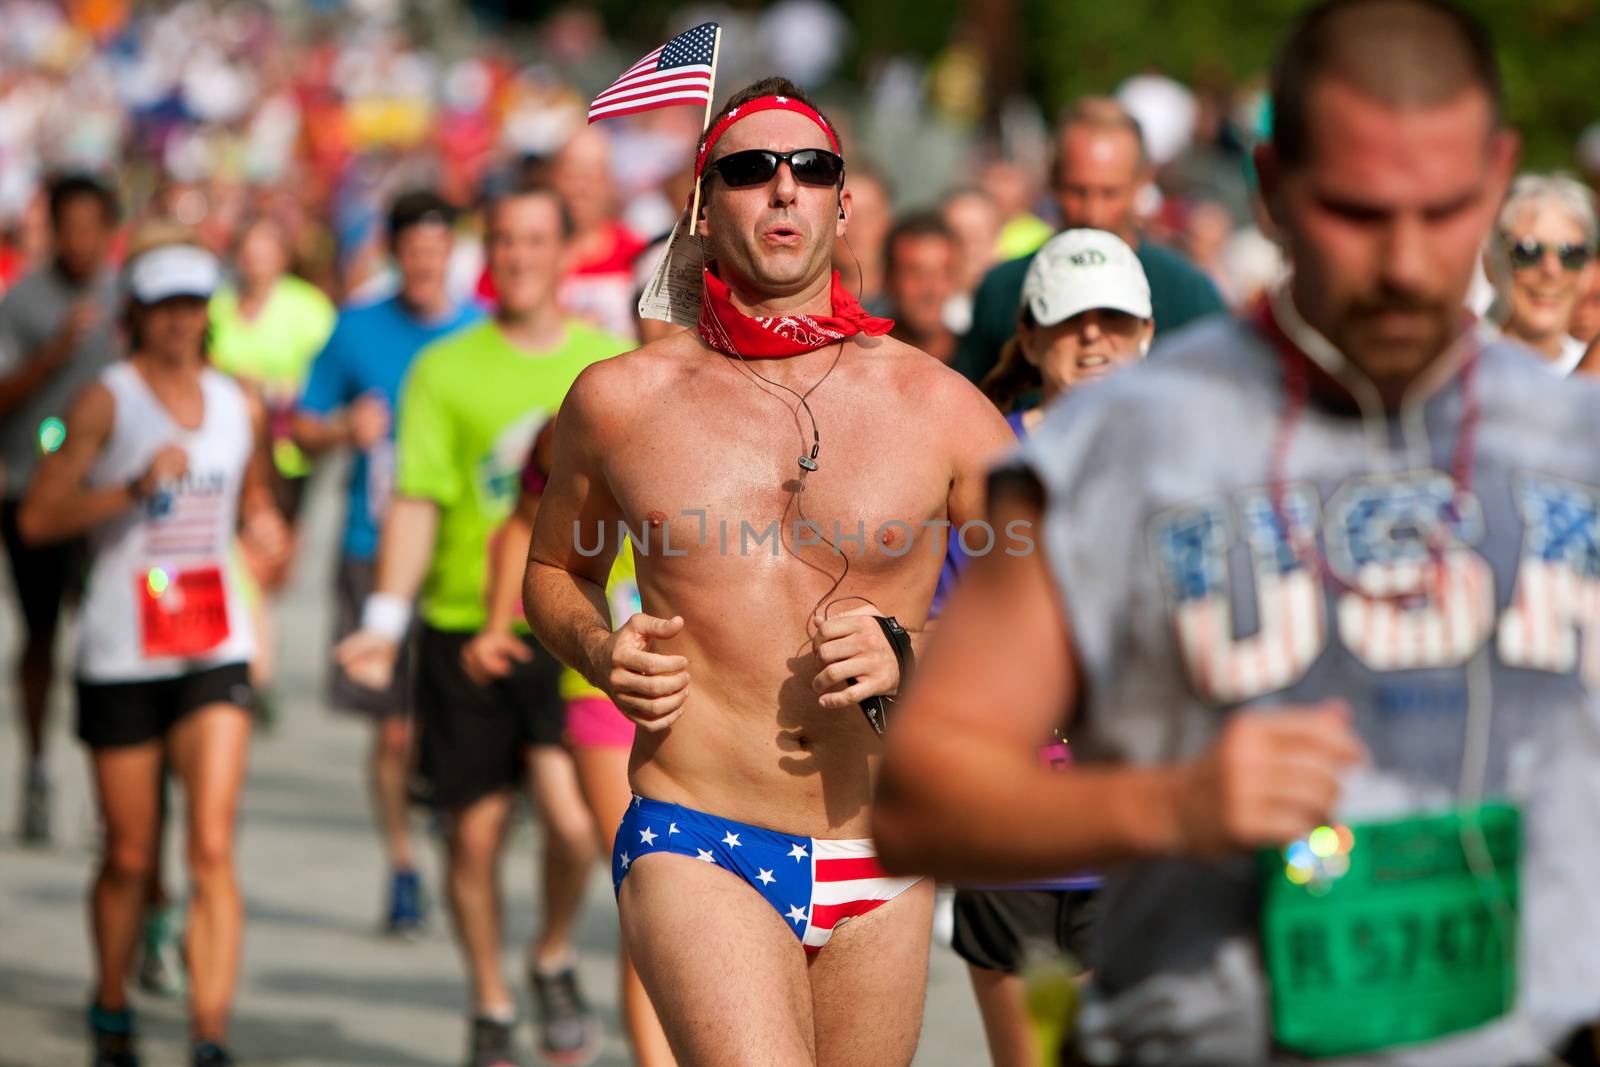 Atlanta, GA, USA - July 4, 2014:  A man running in a bikini swimsuit and with an American flag in his bandana, heads for the finish line of the Peachtree Road Race.